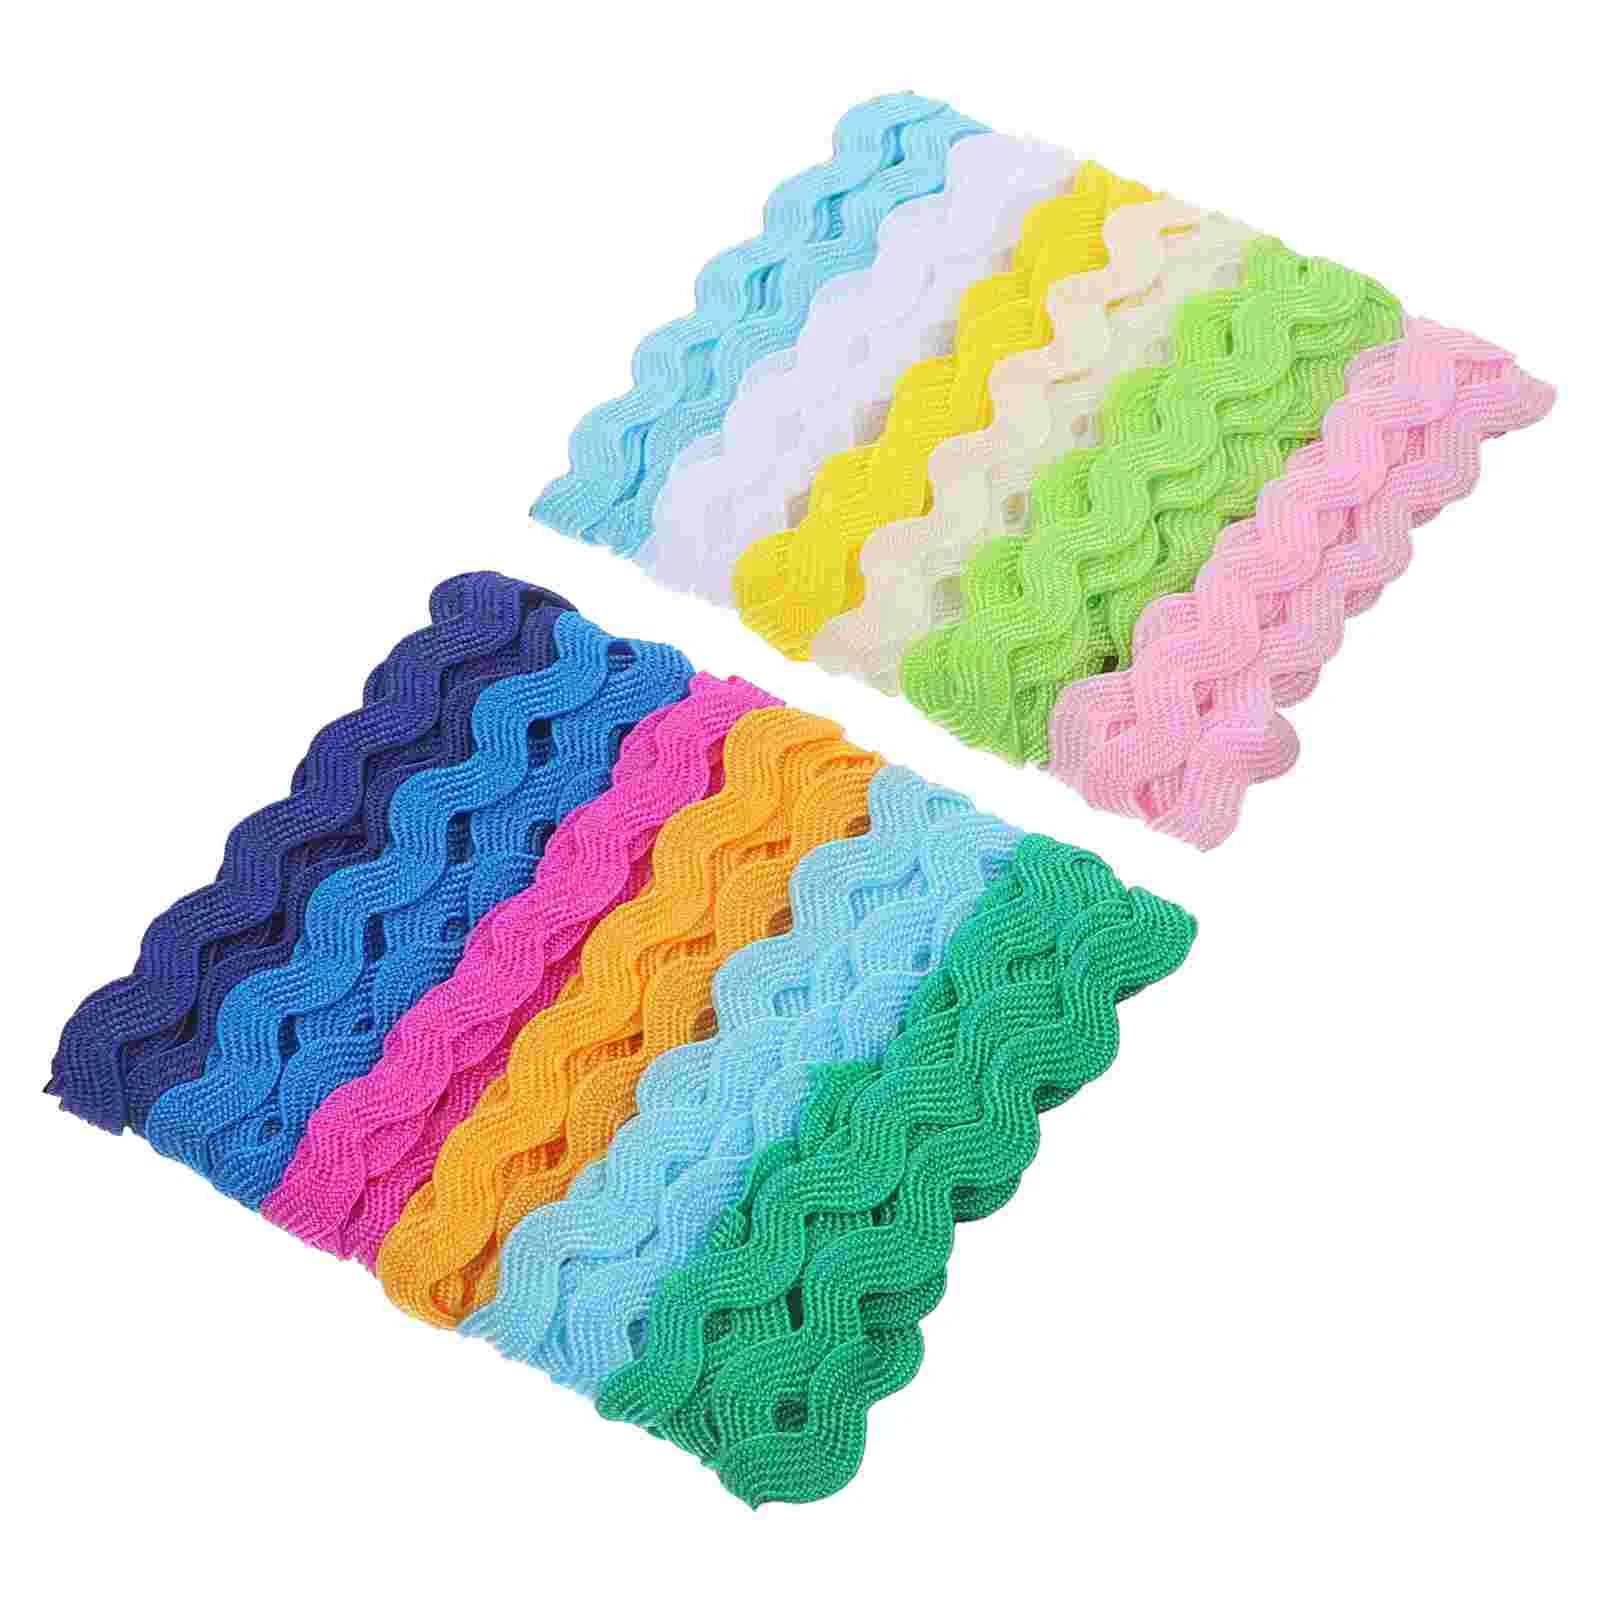 

2 Roll 8mm DIY Clothing Accessories Six Colors Row Wavy Ribbon S Shape Fabric Lace for Dress Sarees Blouses Caps Bags Sewing